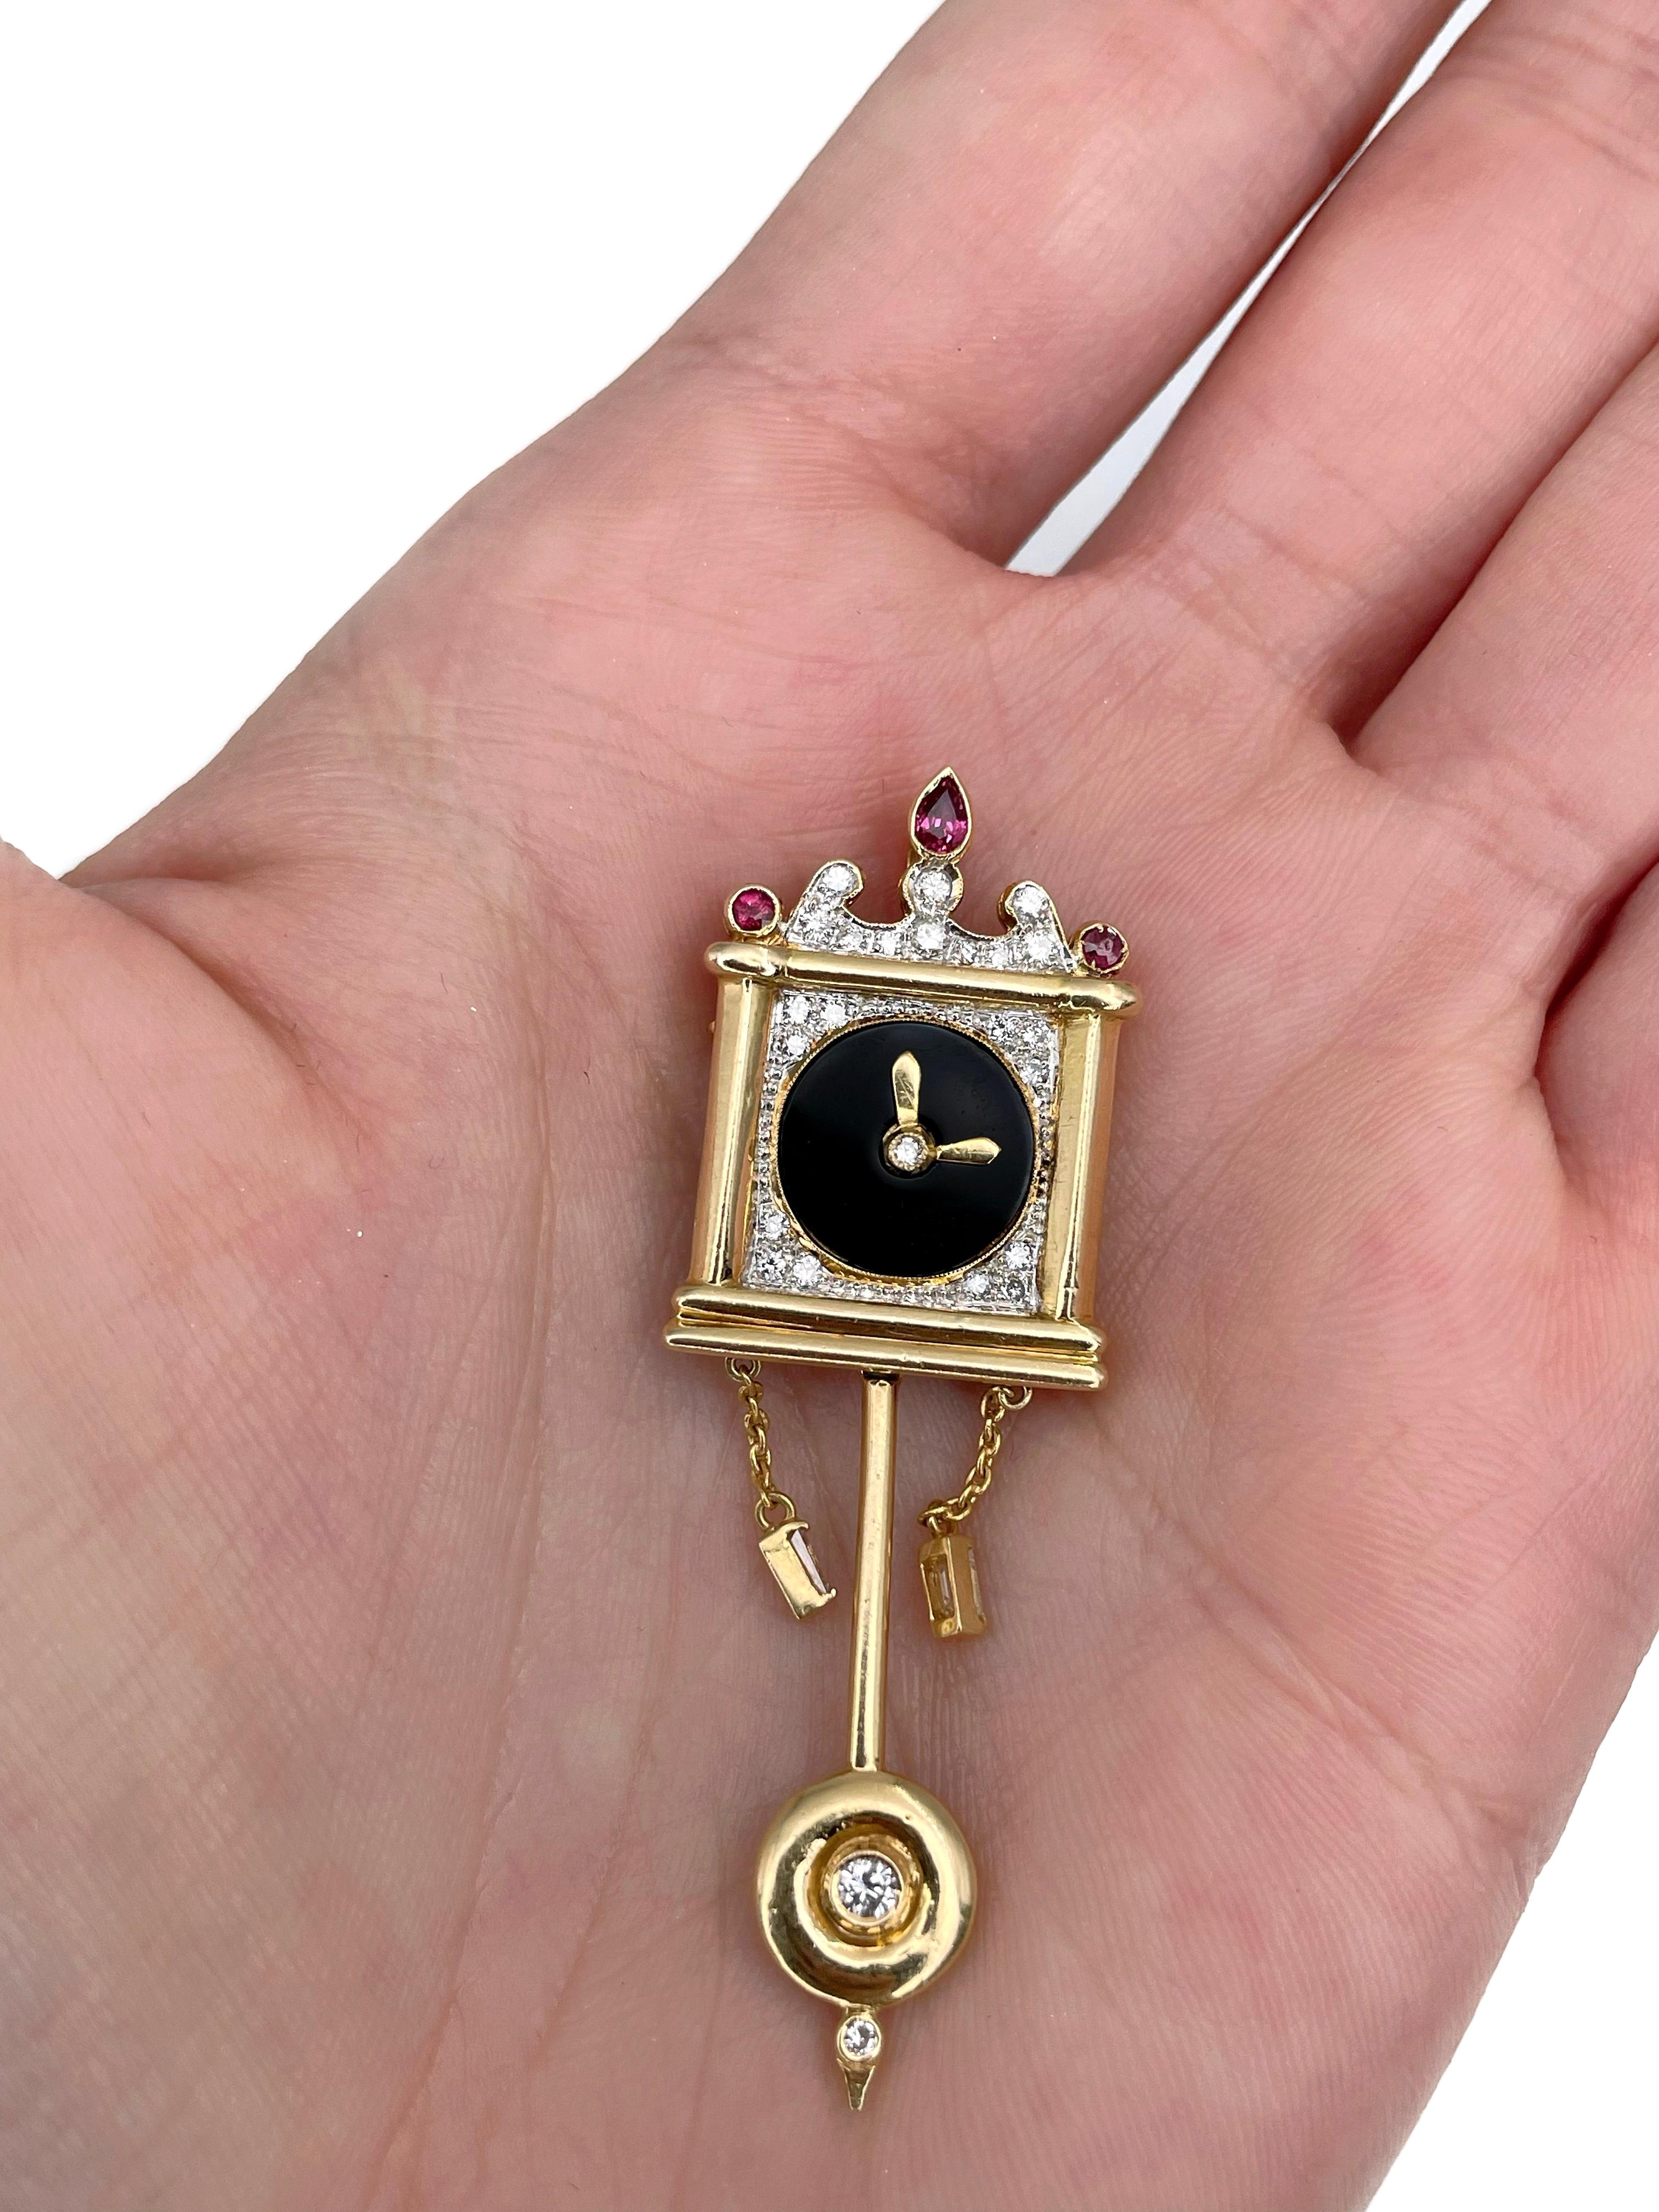 Vintage 18 Karat Gold 0.38ct Diamond 0.16ct Ruby Onyx Wall Clock Pendant Brooch In Good Condition For Sale In Vilnius, LT